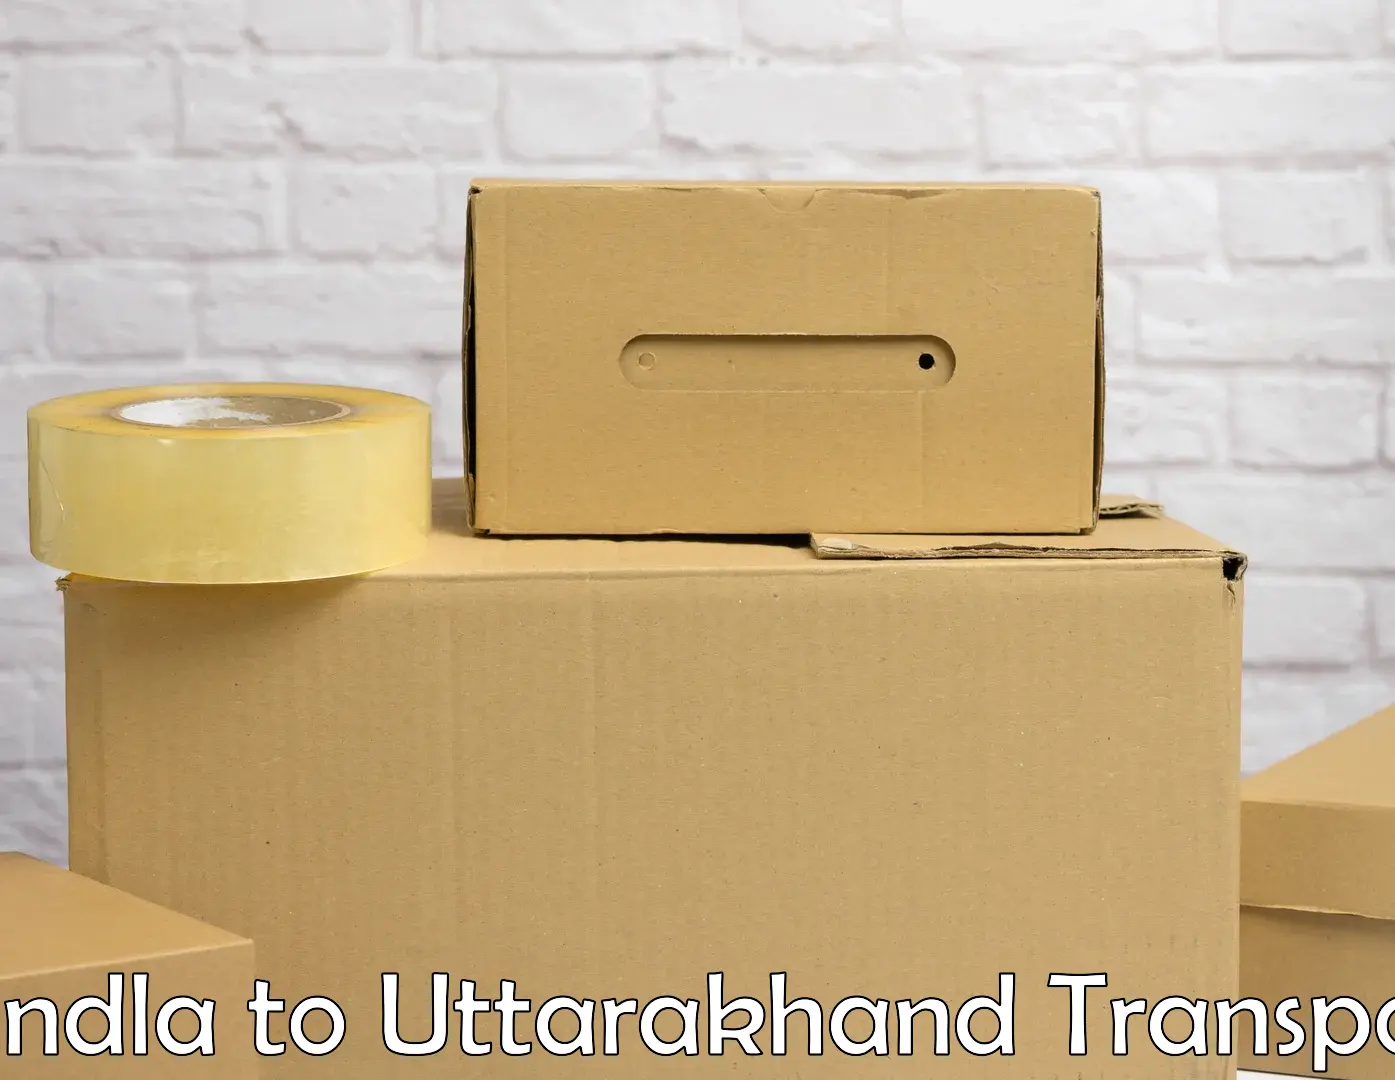 Transport bike from one state to another Sundla to Uttarakhand